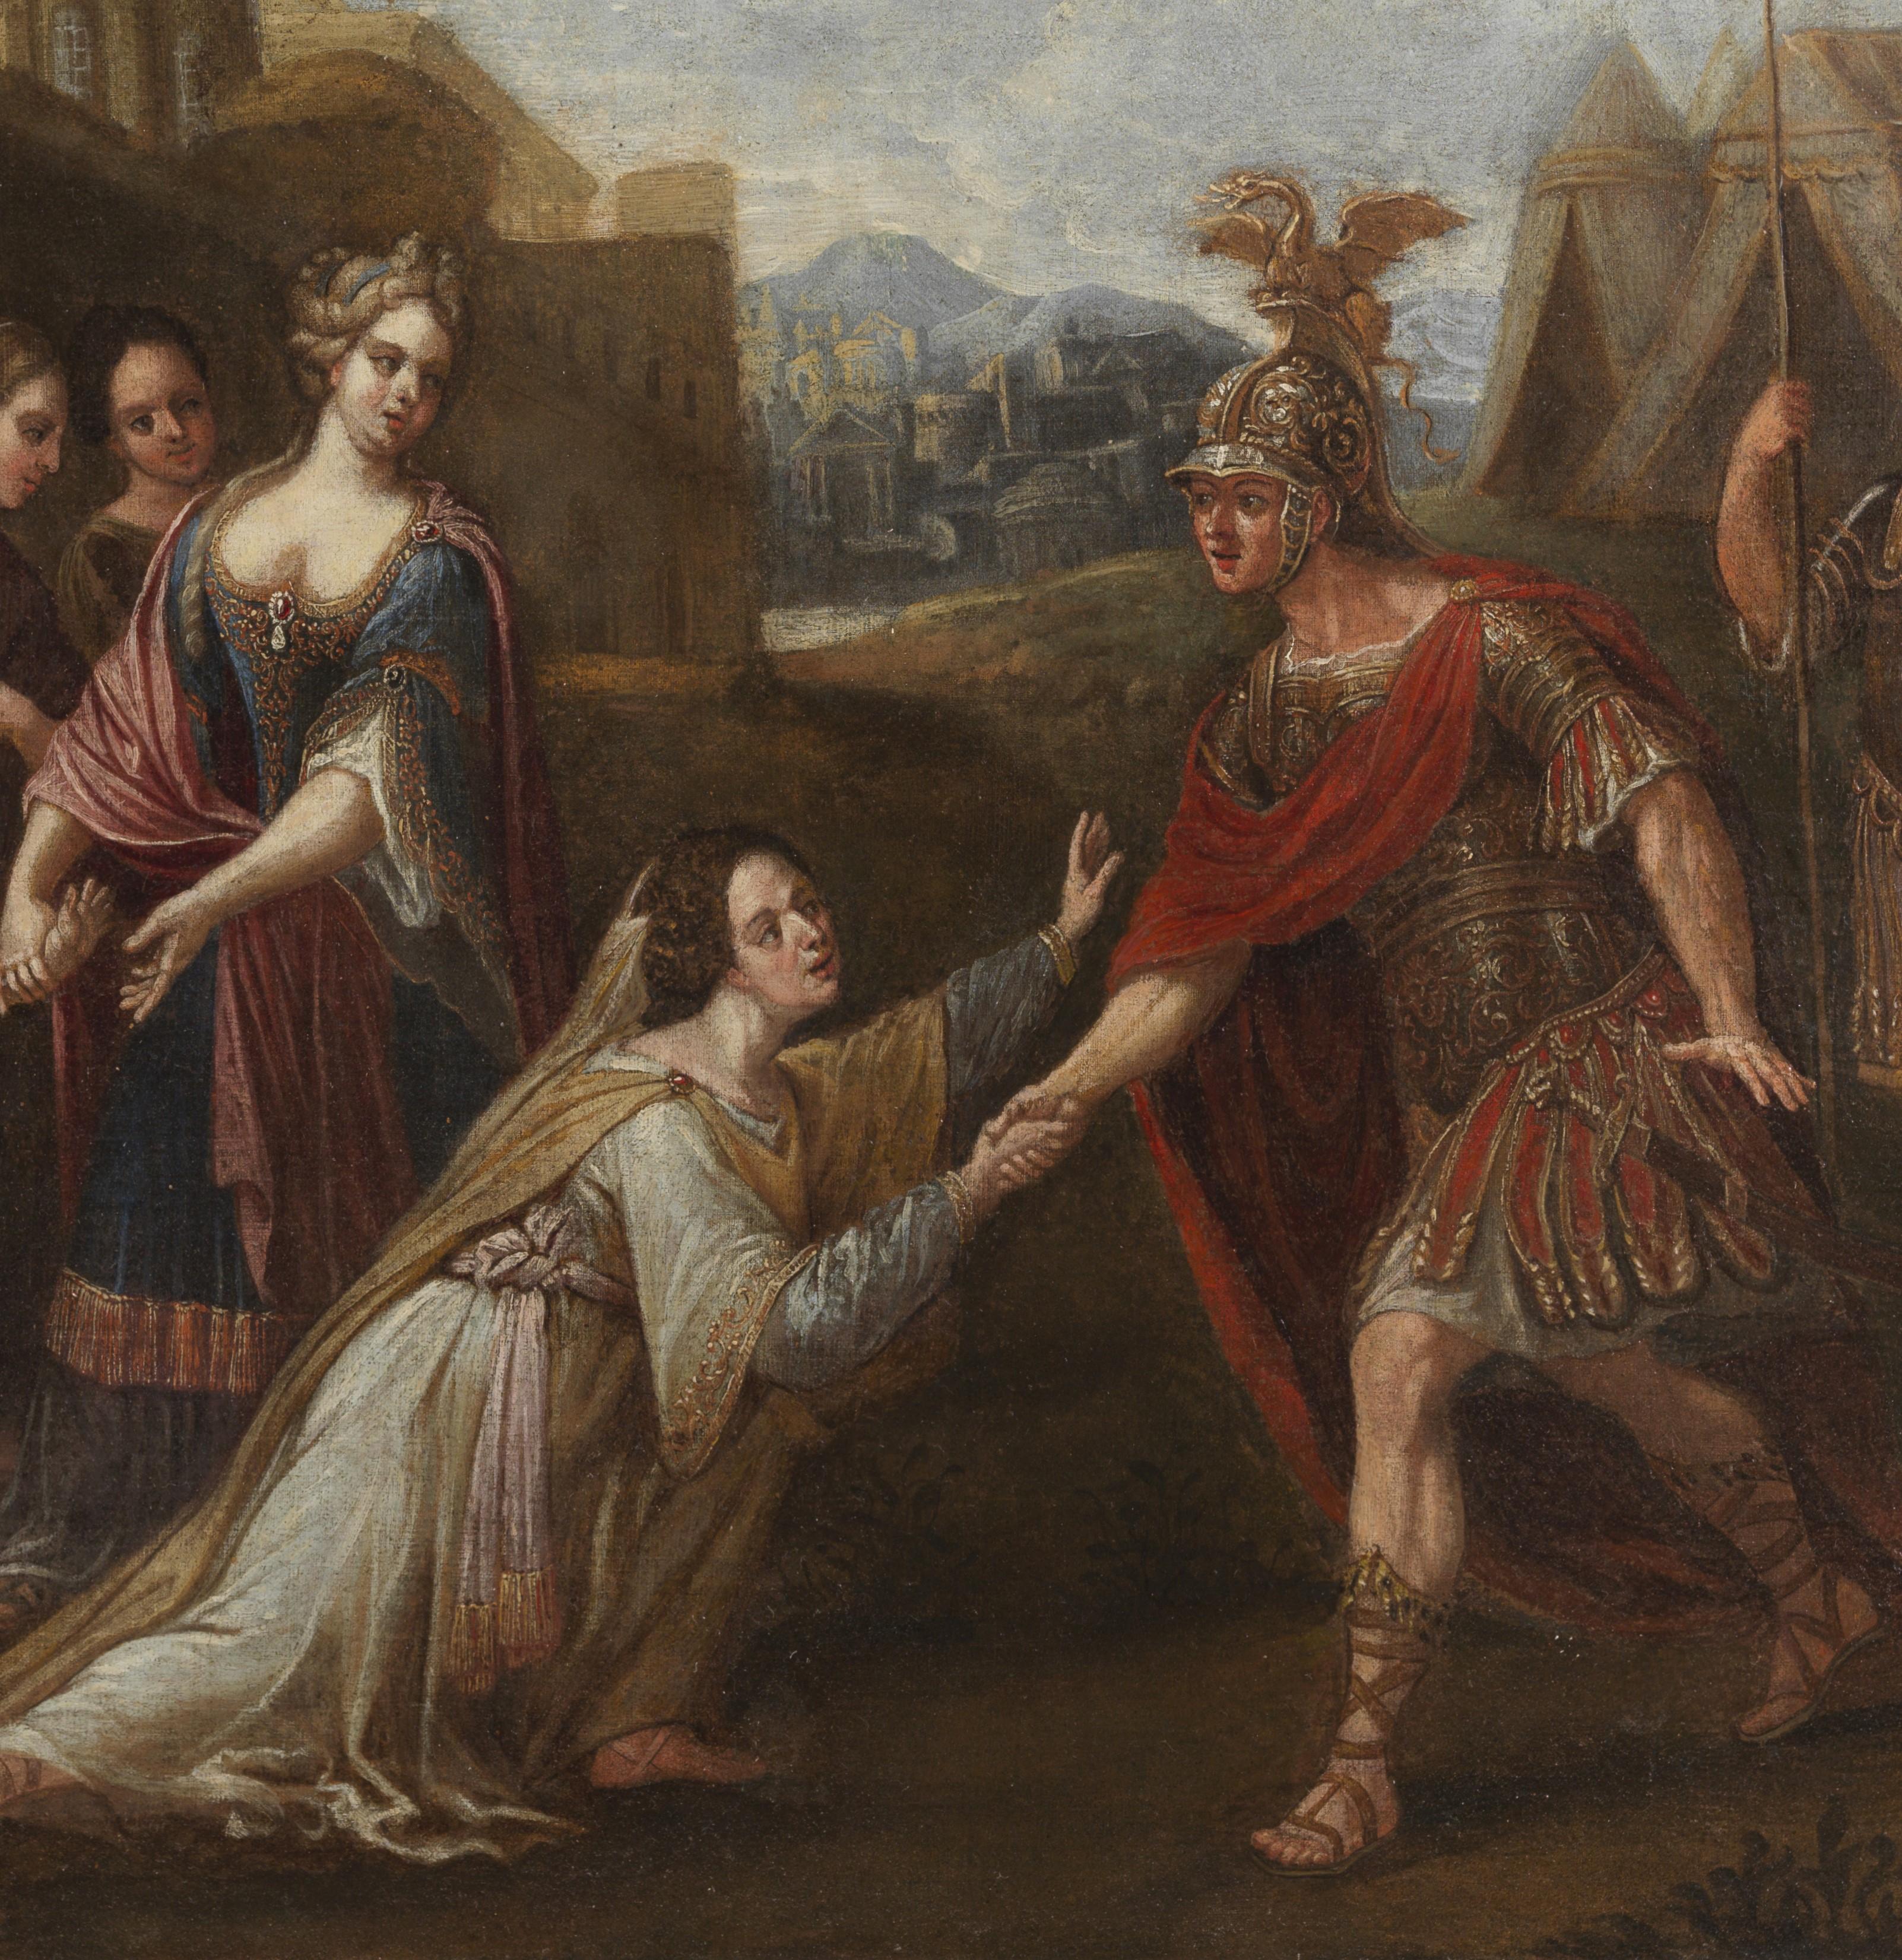 Painting oil on canvas, measuring 78 x 110 unframed and 97 x 122 cm with coeval frame depicting the family of Darius with Alexander the Great, from the Roman school of the second half of the 17th century.

History tells us that in 333 BC. Alexander